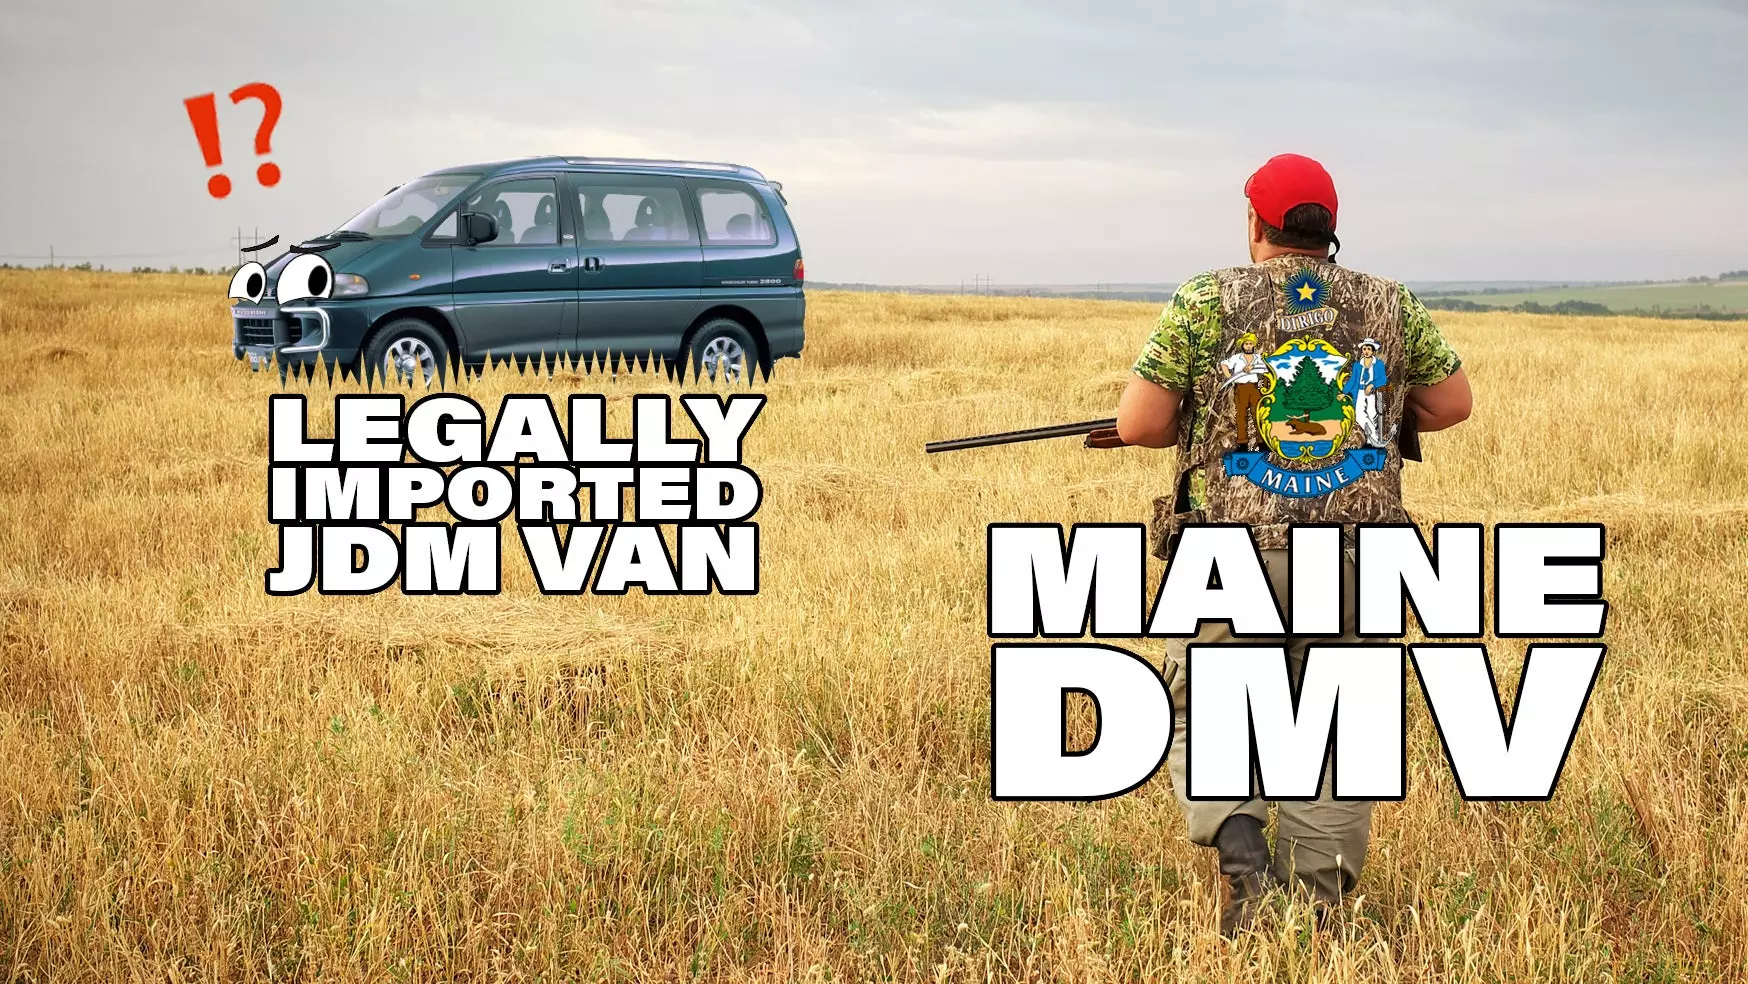 Maine’s Crackdown on JDM Vans Represents a Real Danger for Every Grey-Market Import Car | Autance